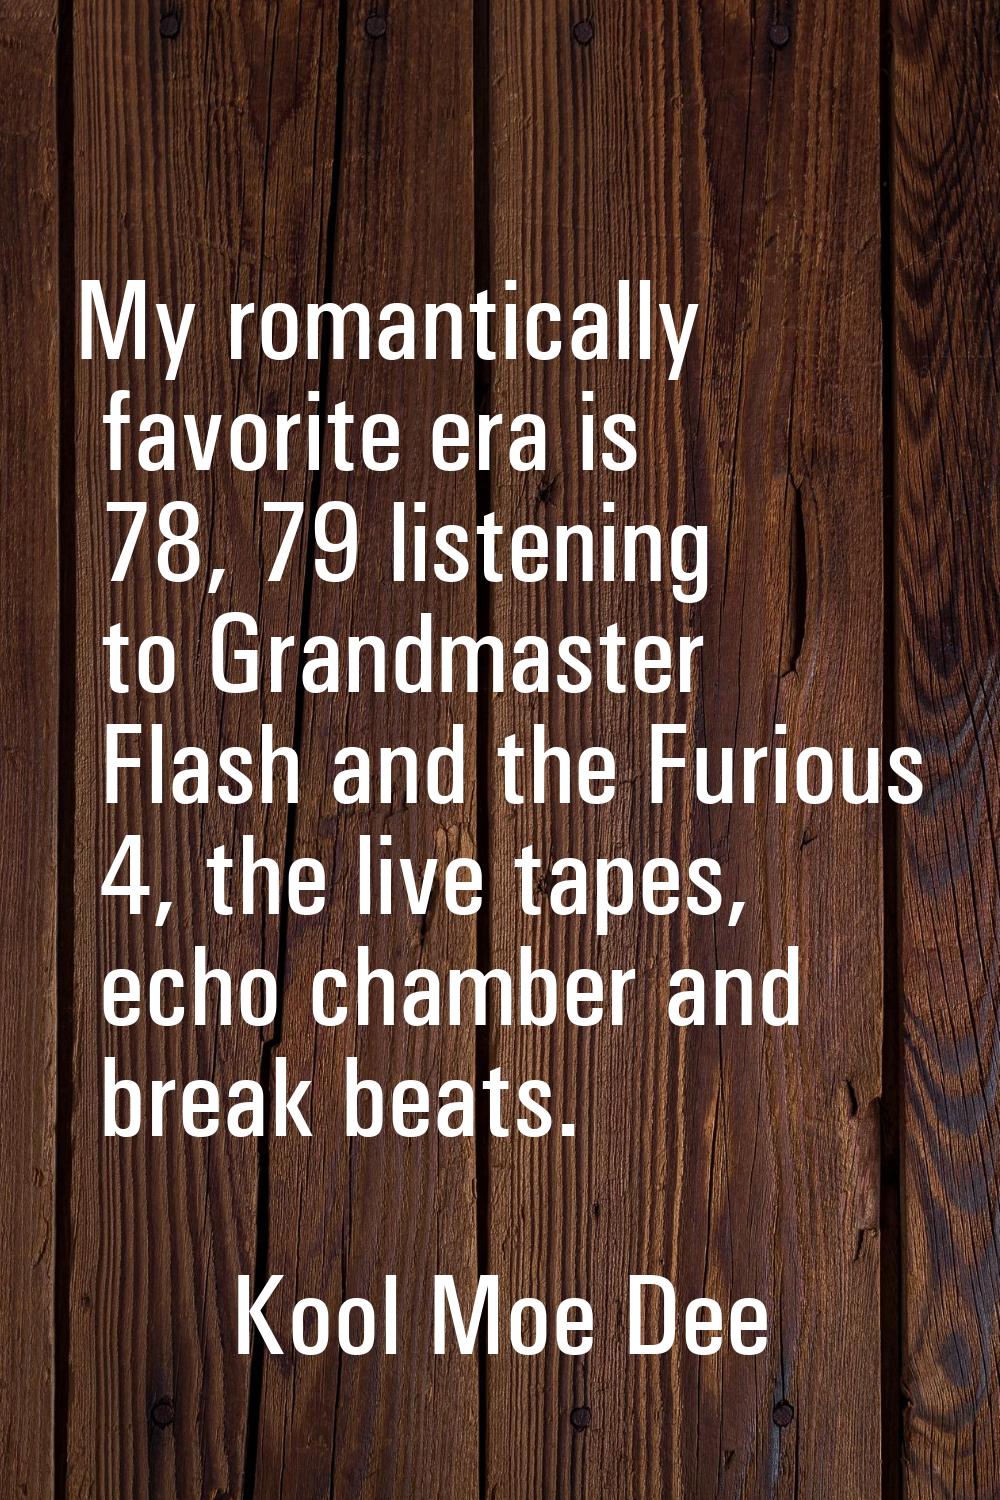 My romantically favorite era is 78, 79 listening to Grandmaster Flash and the Furious 4, the live t